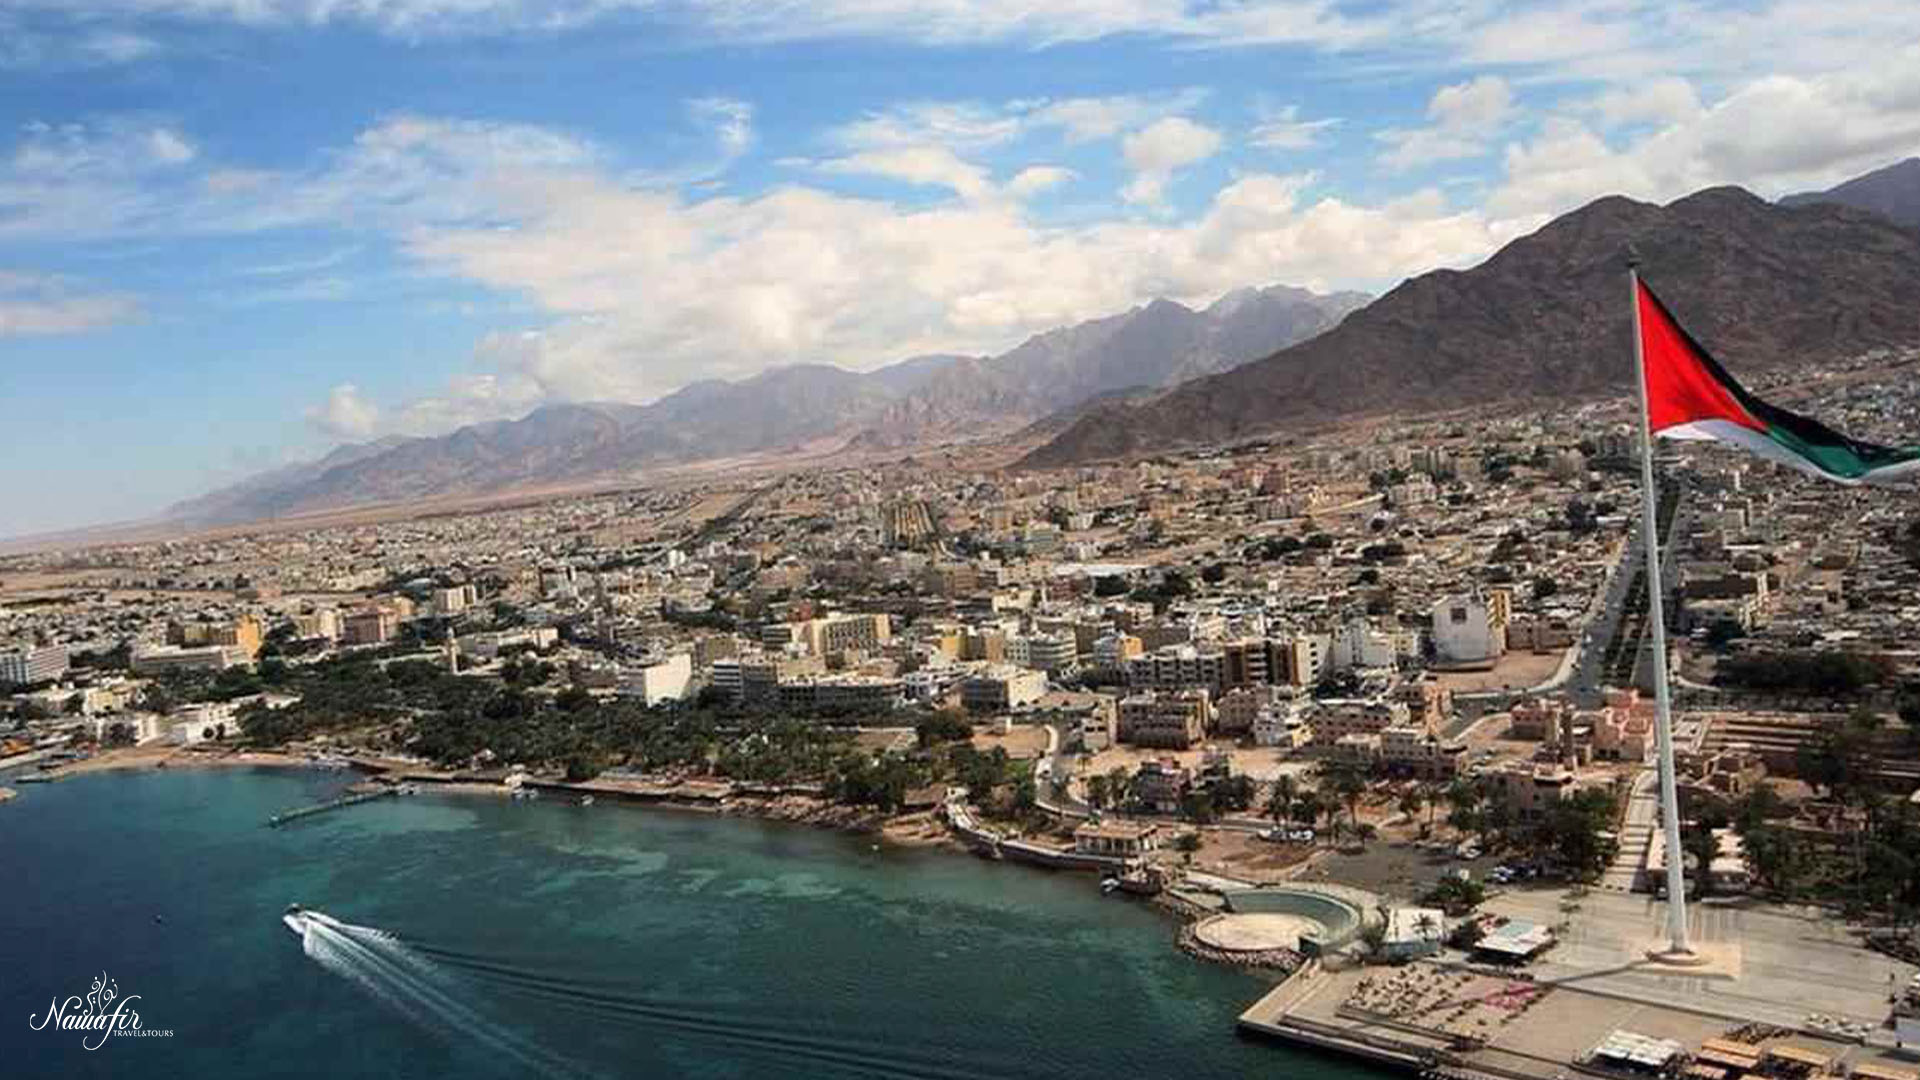 A panoramic photograph immortalizes the coastal city of Aqaba, gracefully adorning the shores of the Red Sea, while buildings and mountains form a striking backdrop.